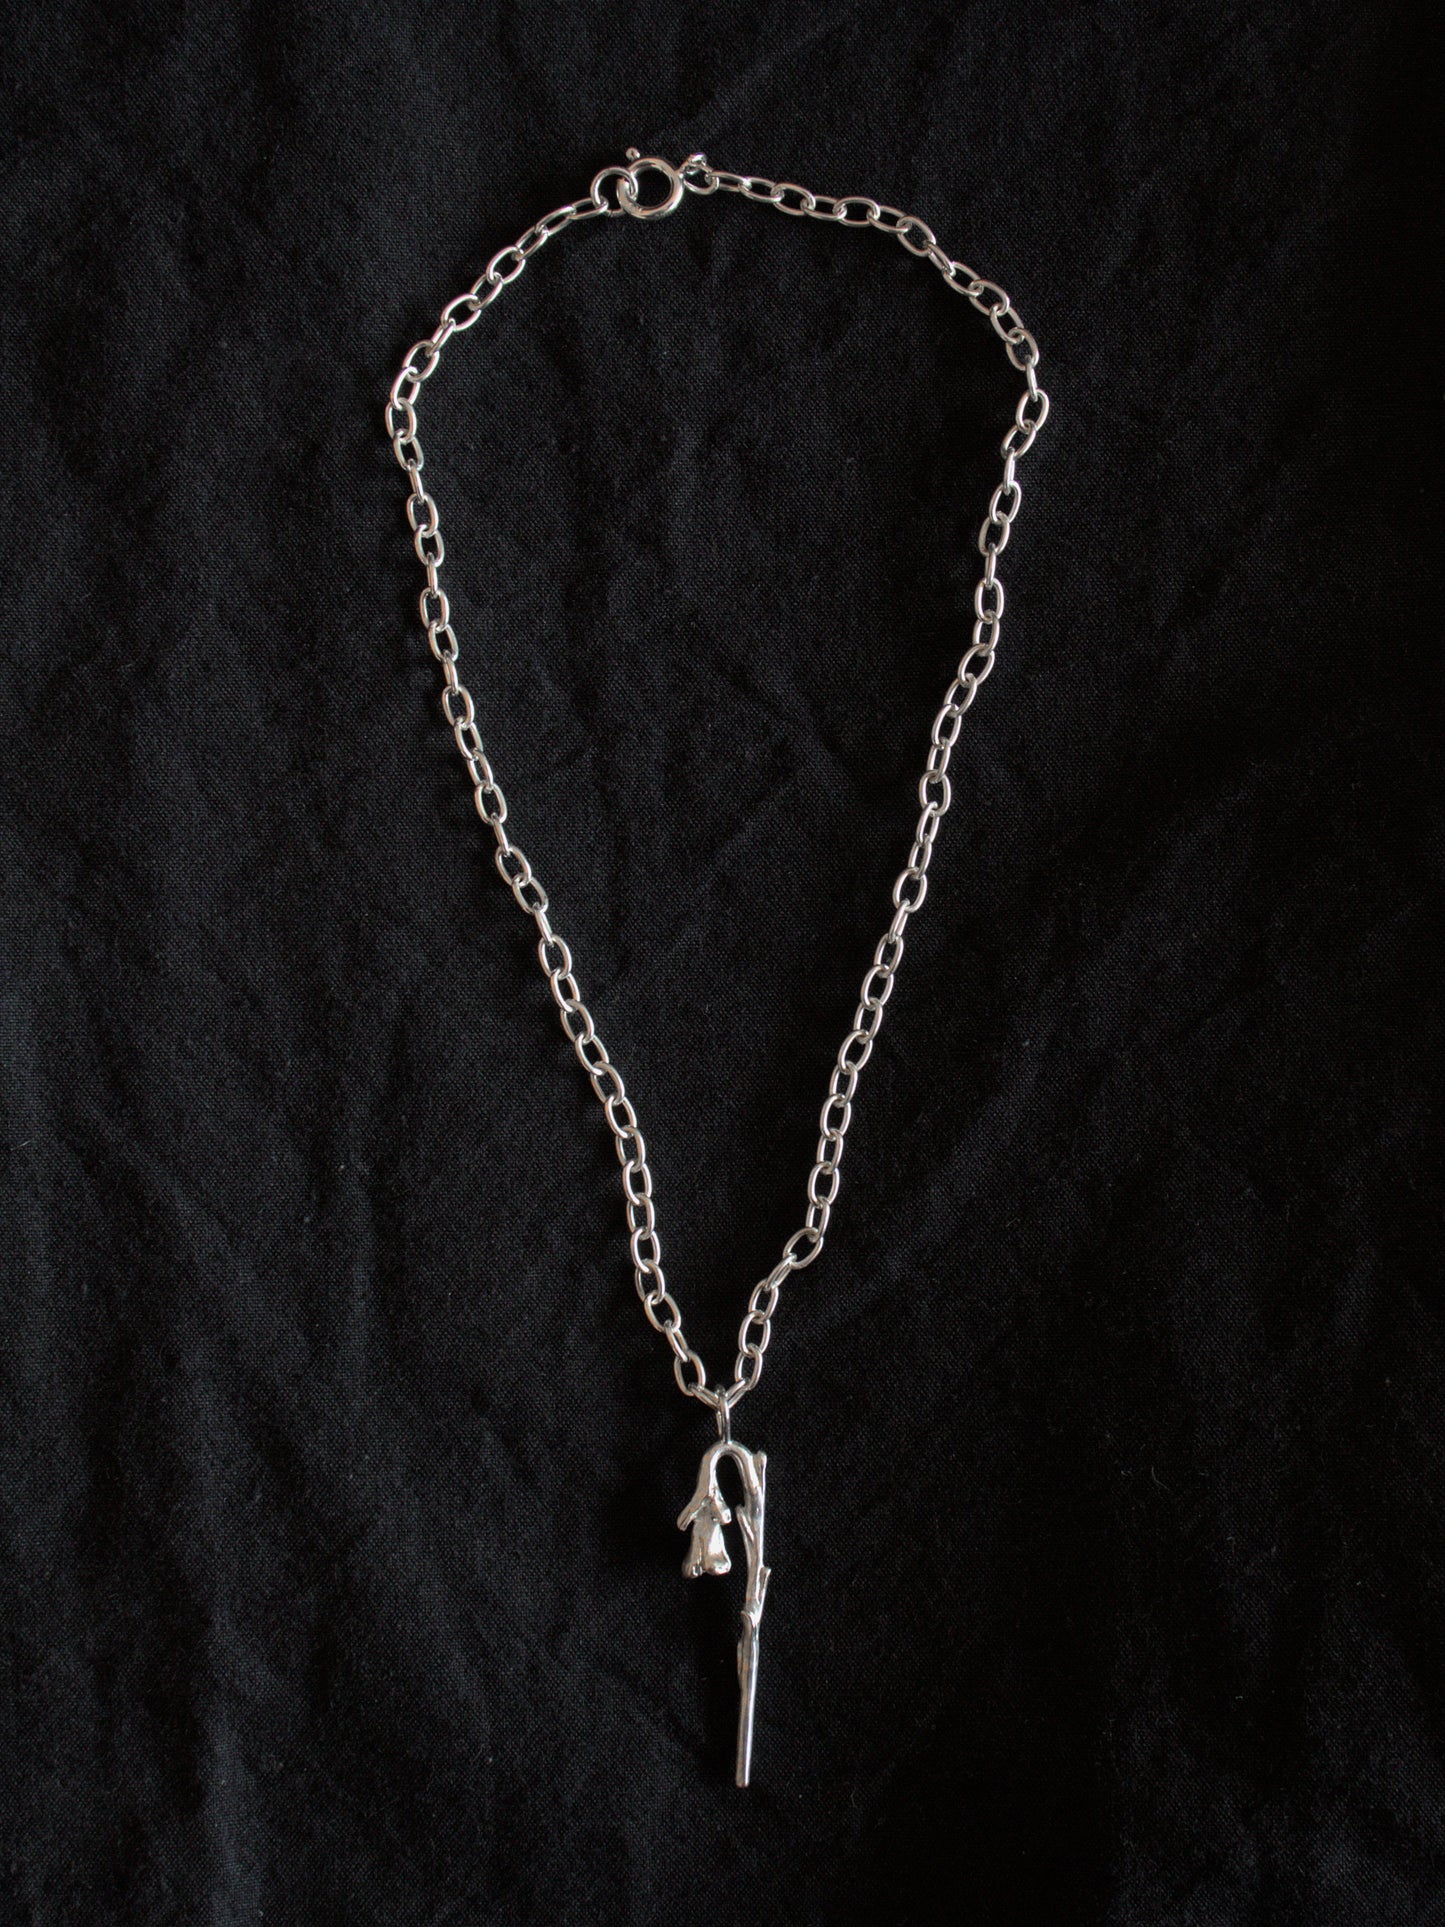 Ghost Pipe necklace